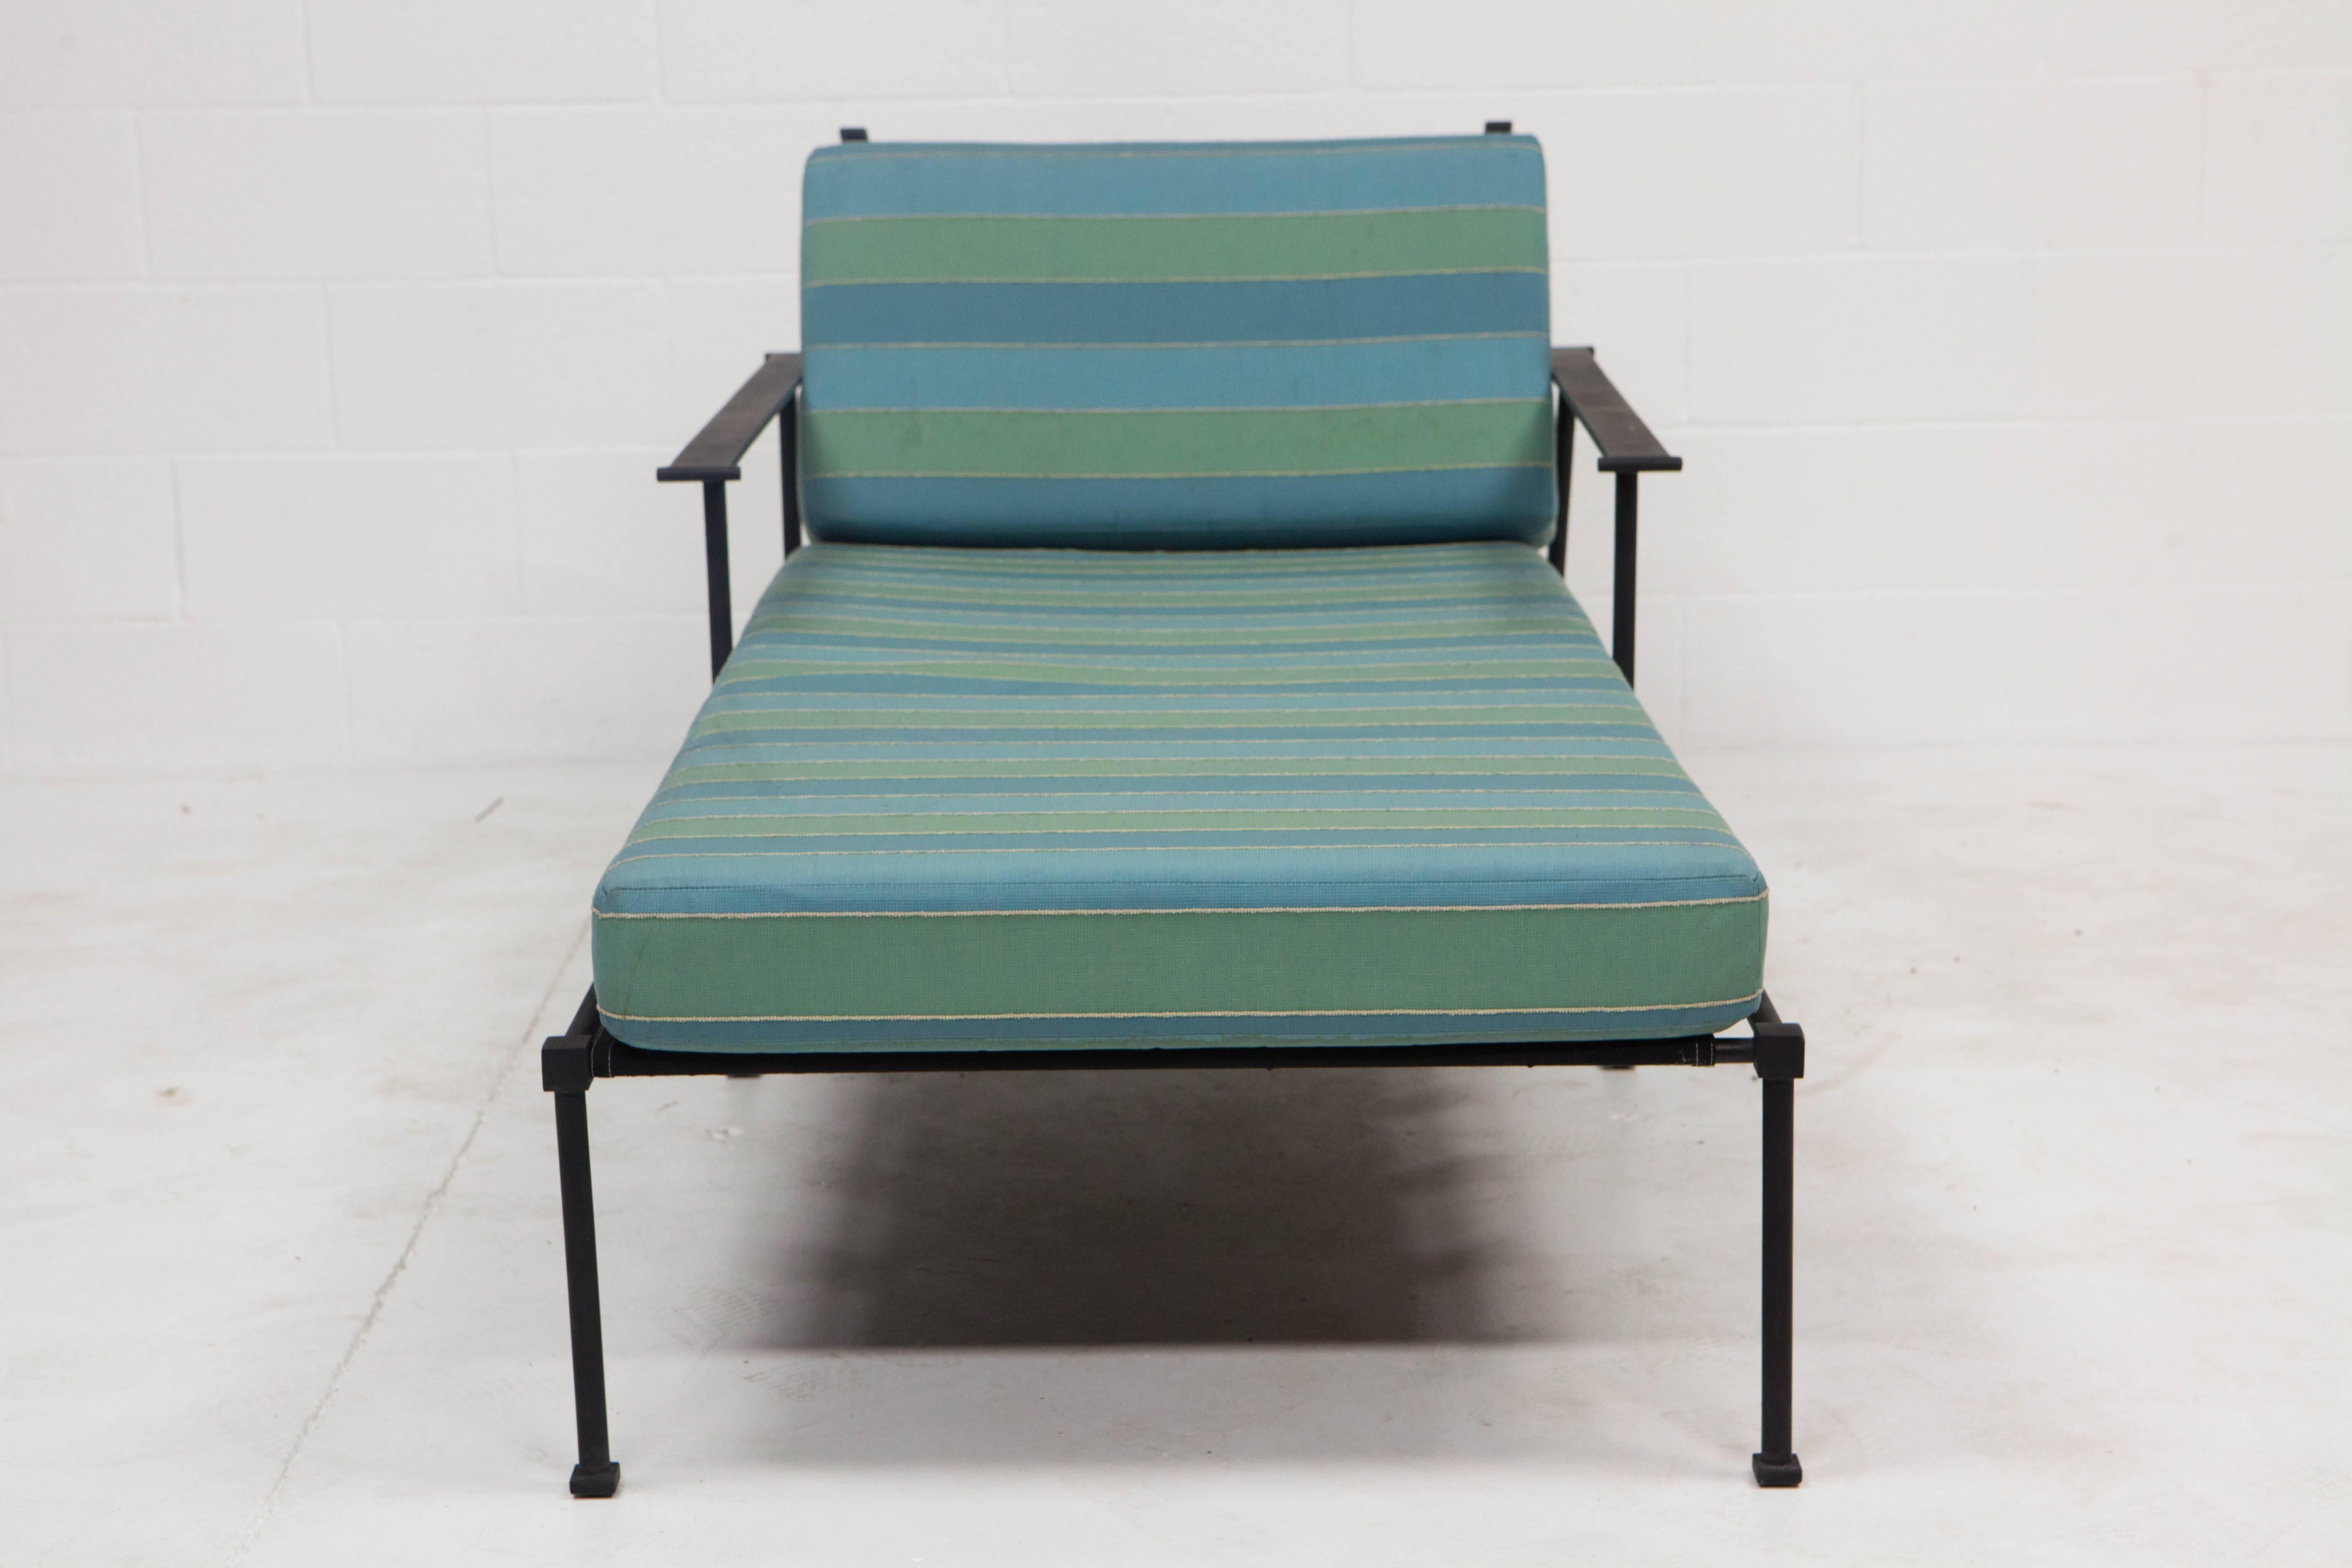 American Outdoor Vintage Chaise Lounges